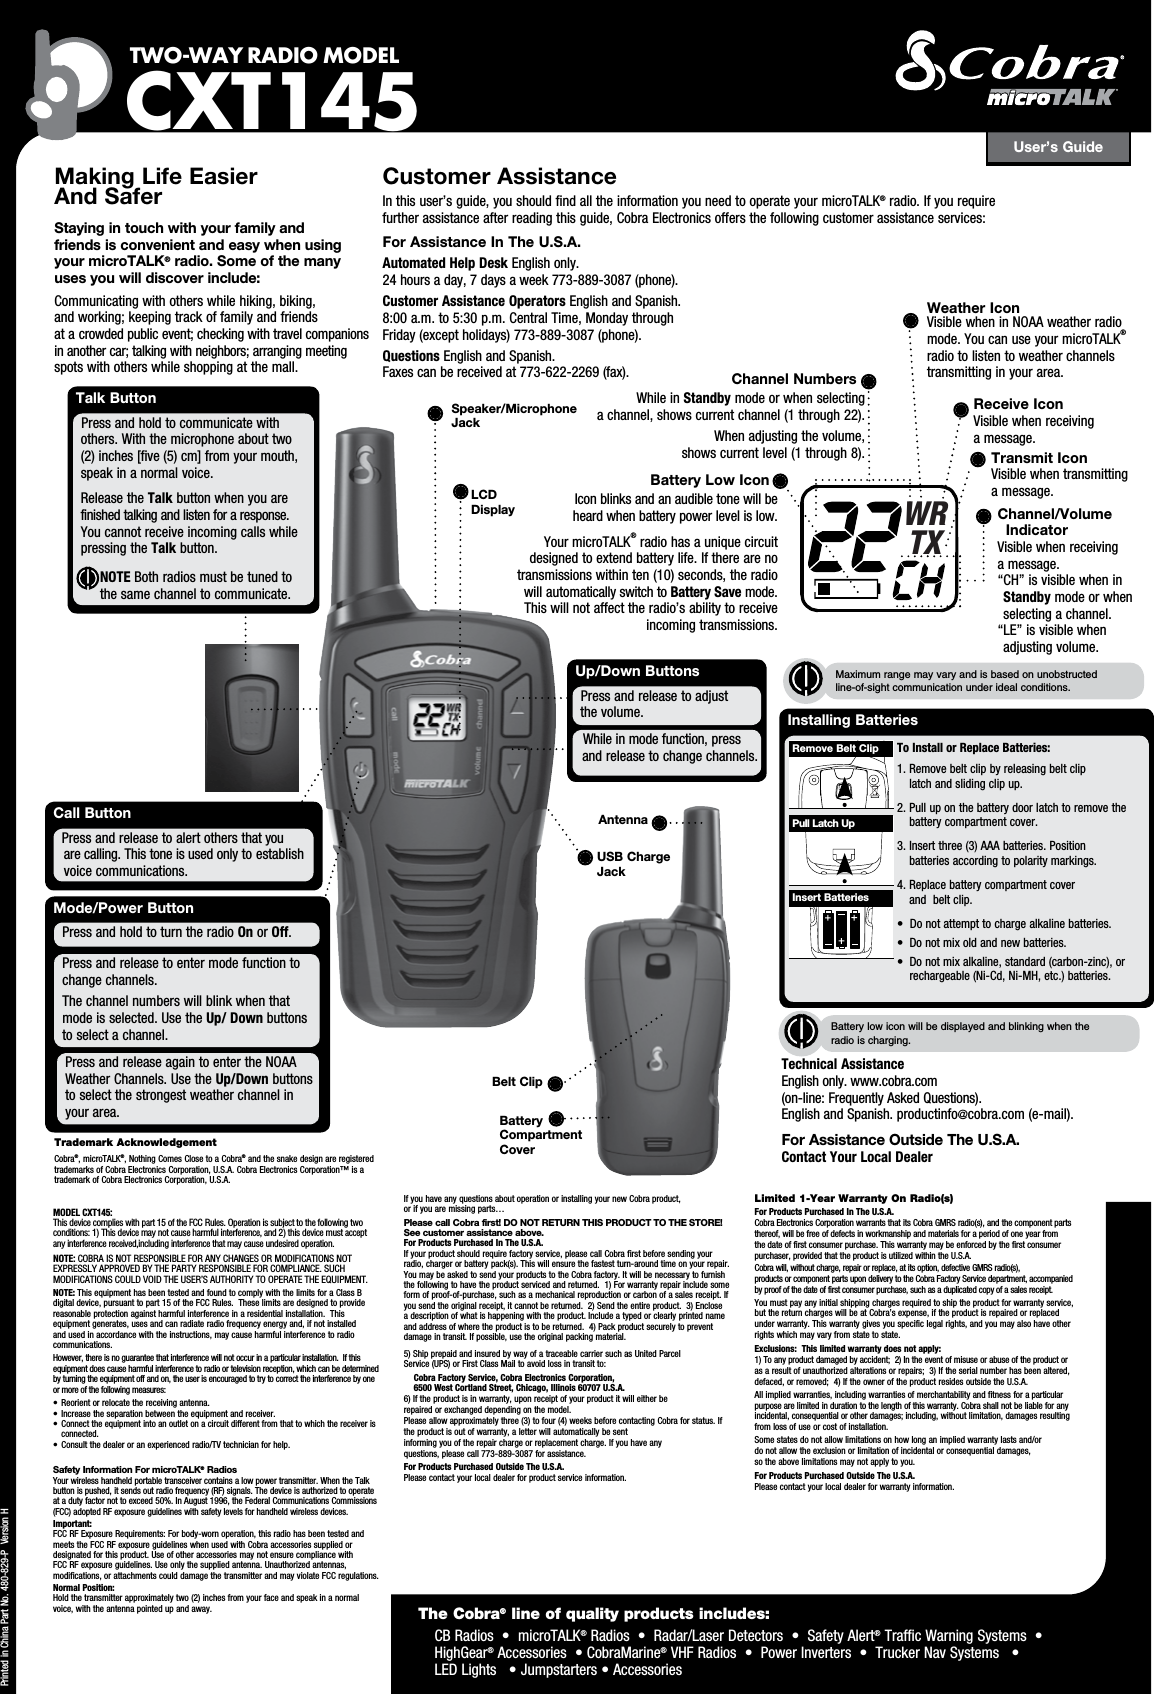 User’s GuideTWO-WAY RADIO  MODEL CXT145Making Life Easier  And Safer Staying in touch with your family and  friends is convenient and easy when using  your microTALK® radio. Some of the many  uses you will discover include:Communicating with others while hiking, biking,  and working; keeping track of family and friends  at a crowded public event; checking with travel companions in another car; talking with neighbors; arranging meeting spots with others while shopping at the mall.Customer AssistanceIn this user’s guide, you should find all the information you need to operate your microTALK® radio. If you require  further assistance after reading this guide, Cobra Electronics offers the following customer assistance services:For Assistance In The U.S.A. Automated Help Desk English only.  24 hours a day, 7 days a week 773-889-3087 (phone). Customer Assistance Operators English and Spanish.  8:00 a.m. to 5:30 p.m. Central Time, Monday through Friday (except holidays) 773-889-3087 (phone). Questions English and Spanish.  Faxes can be received at 773-622-2269 (fax). Up/Down ButtonsWhile in mode function, press      and release to change channels.Press and release to adjust    the volume.Call ButtonPress and release to alert others that you    are calling. This tone is used only to establish    voice communications.Printed in China Part No. 480-829-P  Version HTalk ButtonPress and hold to communicate with      others. With the microphone about two      (2) inches [five (5) cm] from your mouth,      speak in a normal voice.   Release the Talk button when you are      finished talking and listen for a response.    You cannot receive incoming calls while    pressing the Talk button.            NOTE Both radios must be tuned to the same channel to communicate.LCD DisplayMaximum range may vary and is based on unobstructed  line-of-sight communication under ideal conditions. Trademark AcknowledgementCobra®, microTALK®, Nothing Comes Close to a Cobra® and the snake design are registered trademarks of Cobra Electronics Corporation, U.S.A. Cobra Electronics Corporation™ is a trademark of Cobra Electronics Corporation, U.S.A. The Cobra® line of quality products includes:     CB Radios  •  microTALK® Radios  •  Radar/Laser Detectors  •  Safety Alert® Traffic Warning Systems  •   HighGear® Accessories  • CobraMarine® VHF Radios  •  Power Inverters  •  Trucker Nav Systems   •  LED Lights   • Jumpstarters • AccessoriesSpeaker/MicrophoneJackChannel NumbersWhile in Standby mode or when selecting  a channel, shows current channel (1 through 22).When adjusting the volume,  shows current level (1 through 8).Battery Low IconIcon blinks and an audible tone will be  heard when battery power level is low.Your microTALK® radio has a unique circuit designed to extend battery life. If there are no transmissions within ten (10) seconds, the radio will automatically switch to Battery Save mode. This will not affect the radio’s ability to receive incoming transmissions.Receive IconVisible when receiving  a message.Transmit IconVisible when transmitting a message.Channel/Volume IndicatorVisible when receiving  a message. “ CH” is visible when in Standby mode or when selecting a channel.“ LE” is visible when  adjusting volume.Technical Assistance  English only. www.cobra.com  (on-line: Frequently Asked Questions).  English and Spanish. productinfo@cobra.com (e-mail).For Assistance Outside The U.S.A. Contact Your Local DealerMode/Power ButtonPress and release to enter mode function to    change channels.The channel numbers will blink when that mode is selected. Use the Up/ Down buttons to select a channel.Press and hold to turn the radio On or Off.Press and release again to enter the NOAA Weather Channels. Use the Up/Down buttons to select the strongest weather channel in your area. Battery  Compartment  CoverBelt ClipAntenna WRTXUSB Charge JackInstalling Batteries To Install or Replace Batteries: 1.  Remove belt clip by releasing belt clip  latch and sliding clip up.2.  Pull up on the battery door latch to remove the battery compartment cover.3.  Insert three (3) AAA batteries. Position  batteries according to polarity markings.4.  Replace battery compartment cover  and  belt clip.•  Do not attempt to charge alkaline batteries.•  Do not mix old and new batteries.•  Do not mix alkaline, standard (carbon-zinc), or    rechargeable (Ni-Cd, Ni-MH, etc.) batteries.Insert BatteriesPull Latch UpRemove Belt ClipBattery low icon will be displayed and blinking when the radio is charging.Weather IconVisible when in NOAA weather radio mode. You can use your microTALK® radio to listen to weather channels transmitting in your area.MODEL CXT145:This device complies with part 15 of the FCC Rules. Operation is subject to the following two conditions: 1) This device may not cause harmful interference, and 2) this device must accept any interference received,including interference that may cause undesired operation.NOTE: COBRA IS NOT RESPONSIBLE FOR ANY CHANGES OR MODIFICATIONS NOT EXPRESSLY APPROVED BY THE PARTY RESPONSIBLE FOR COMPLIANCE. SUCH MODIFICATIONS COULD VOID THE USER’S AUTHORITY TO OPERATE THE EQUIPMENT. NOTE: This equipment has been tested and found to comply with the limits for a Class B digital device, pursuant to part 15 of the FCC Rules.  These limits are designed to provide reasonable protection against harmful interference in a residential installation.  This equipment generates, uses and can radiate radio frequency energy and, if not installed and used in accordance with the instructions, may cause harmful interference to radio communications.However, there is no guarantee that interference will not occur in a particular installation.  If this equipment does cause harmful interference to radio or television reception, which can be determined by turning the equipment off and on, the user is encouraged to try to correct the interference by one or more of the following measures:•  Reorient or relocate the receiving antenna.•  Increase the separation between the equipment and receiver.• Connect the equipment into an outlet on a circuit different from that to which the receiver is connected.•  Consult the dealer or an experienced radio/TV technician for help.Safety Information For microTALK® RadiosYour wireless handheld portable transceiver contains a low power transmitter. When the Talk button is pushed, it sends out radio frequency (RF) signals. The device is authorized to operate at a duty factor not to exceed 50%. In August 1996, the Federal Communications Commissions (FCC) adopted RF exposure guidelines with safety levels for handheld wireless devices. Important: FCC RF Exposure Requirements: For body-worn operation, this radio has been tested and meets the FCC RF exposure guidelines when used with Cobra accessories supplied or designated for this product. Use of other accessories may not ensure compliance with FCC RF exposure guidelines. Use only the supplied antenna. Unauthorized antennas, modifications, or attachments could damage the transmitter and may violate FCC regulations. Normal Position: Hold the transmitter approximately two (2) inches from your face and speak in a normal voice, with the antenna pointed up and away.If you have any questions about operation or installing your new Cobra product,  or if you are missing parts… Please call Cobra first! DO NOT RETURN THIS PRODUCT TO THE STORE! See customer assistance above.For Products Purchased In The U.S.A.If your product should require factory service, please call Cobra first before sending your radio, charger or battery pack(s). This will ensure the fastest turn-around time on your repair. You may be asked to send your products to the Cobra factory. It will be necessary to furnish the following to have the product serviced and returned.  1) For warranty repair include some form of proof-of-purchase, such as a mechanical reproduction or carbon of a sales receipt. If you send the original receipt, it cannot be returned.  2) Send the entire product.  3) Enclose  a description of what is happening with the product. Include a typed or clearly printed name and address of where the product is to be returned.  4) Pack product securely to prevent damage in transit. If possible, use the original packing material.  5) Ship prepaid and insured by way of a traceable carrier such as United Parcel  Service (UPS) or First Class Mail to avoid loss in transit to:    Cobra Factory Service, Cobra Electronics Corporation,      6500 West Cortland Street, Chicago, Illinois 60707 U.S.A.   6) If the product is in warranty, upon receipt of your product it will either be  repaired or exchanged depending on the model. Please allow approximately three (3) to four (4) weeks before contacting Cobra for status. If the product is out of warranty, a letter will automatically be sent  informing you of the repair charge or replacement charge. If you have any  questions, please call 773-889-3087 for assistance.For Products Purchased Outside The U.S.A.Please contact your local dealer for product service information.Limited 1-Year Warranty On Radio(s)For Products Purchased In The U.S.A.Cobra Electronics Corporation warrants that its Cobra GMRS radio(s), and the component parts thereof, will be free of defects in workmanship and materials for a period of one year from the date of first consumer purchase. This warranty may be enforced by the first consumer purchaser, provided that the product is utilized within the U.S.A. Cobra will, without charge, repair or replace, at its option, defective GMRS radio(s),  products or component parts upon delivery to the Cobra Factory Service department, accompanied by proof of the date of first consumer purchase, such as a duplicated copy of a sales receipt. You must pay any initial shipping charges required to ship the product for warranty service, but the return charges will be at Cobra’s expense, if the product is repaired or replaced under warranty. This warranty gives you specific legal rights, and you may also have other rights which may vary from state to state.Exclusions:  This limited warranty does not apply:  1) To any product damaged by accident;  2) In the event of misuse or abuse of the product or as a result of unauthorized alterations or repairs;  3) If the serial number has been altered, defaced, or removed;  4) If the owner of the product resides outside the U.S.A.All implied warranties, including warranties of merchantability and fitness for a particular purpose are limited in duration to the length of this warranty. Cobra shall not be liable for any incidental, consequential or other damages; including, without limitation, damages resulting from loss of use or cost of installation. Some states do not allow limitations on how long an implied warranty lasts and/or  do not allow the exclusion or limitation of incidental or consequential damages,  so the above limitations may not apply to you.For Products Purchased Outside The U.S.A.Please contact your local dealer for warranty information.